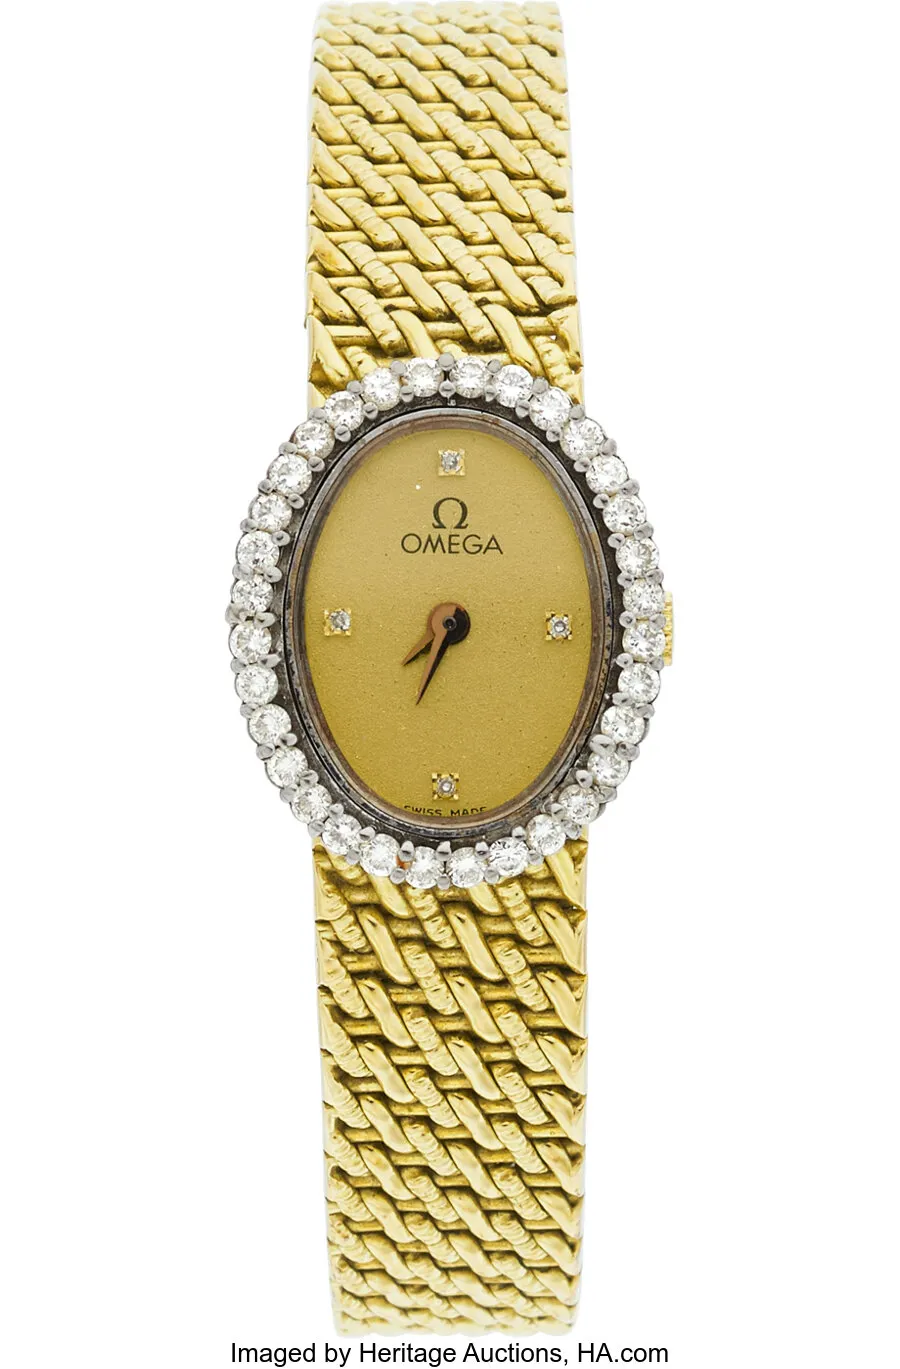 Omega 1450 19mm Yellow gold and diamond-set Gold